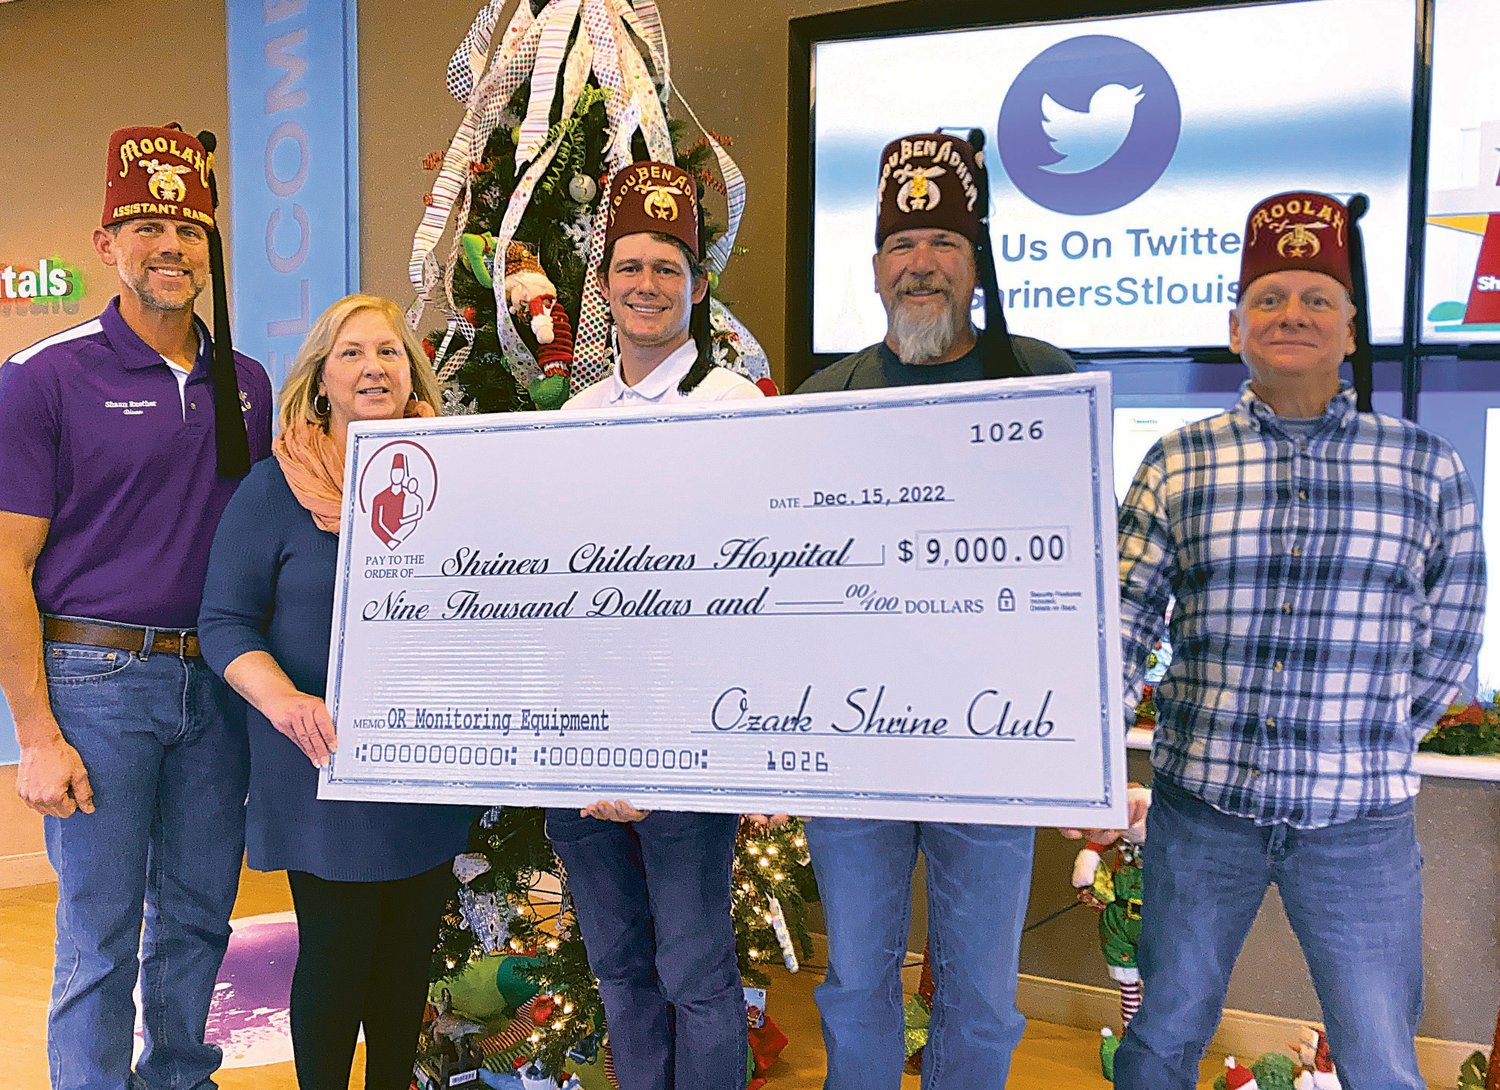 Ozark Shrine Club presented a $9,000 donation to St. Louis Shriners Hospital on Dec. 12. , From left, Shaun Reuther, Dianne Johnson (Shriners Hospital), John M. Behrens, Jeff Reynolds, and John A. Behrens.